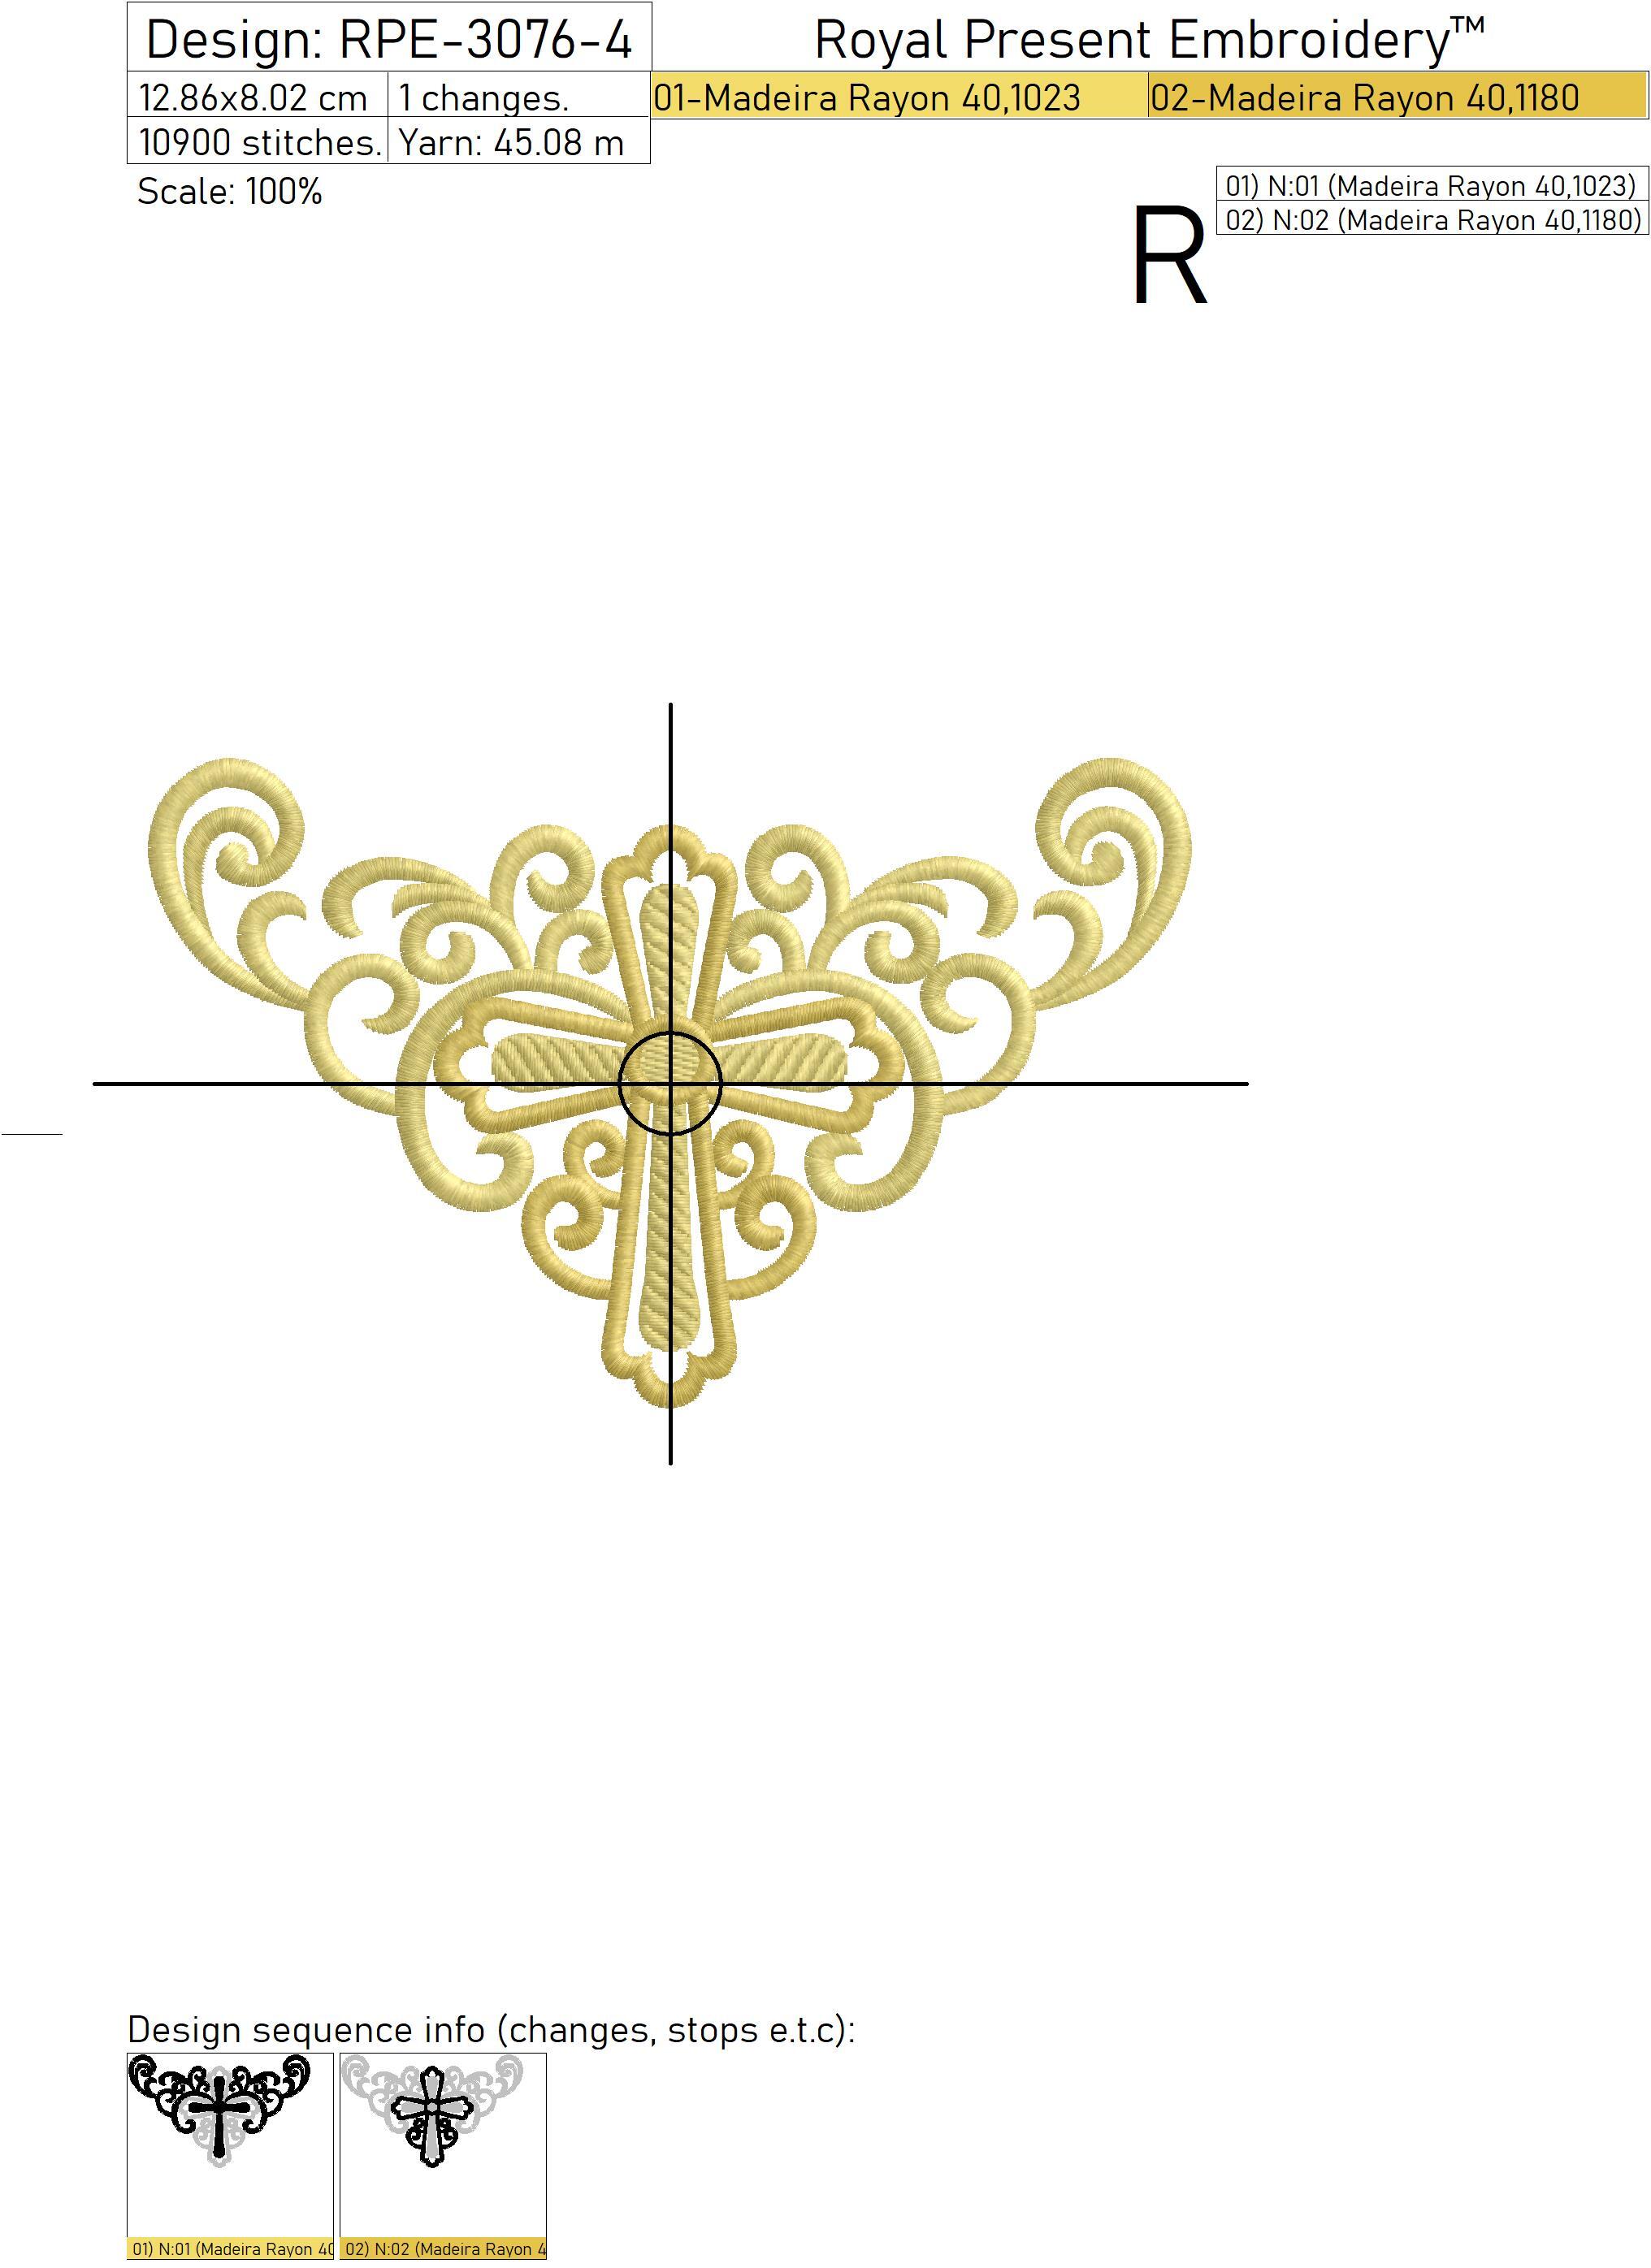 Corner Cross Machine Embroidery Design - 4 sizes | Royal Present Embroidery